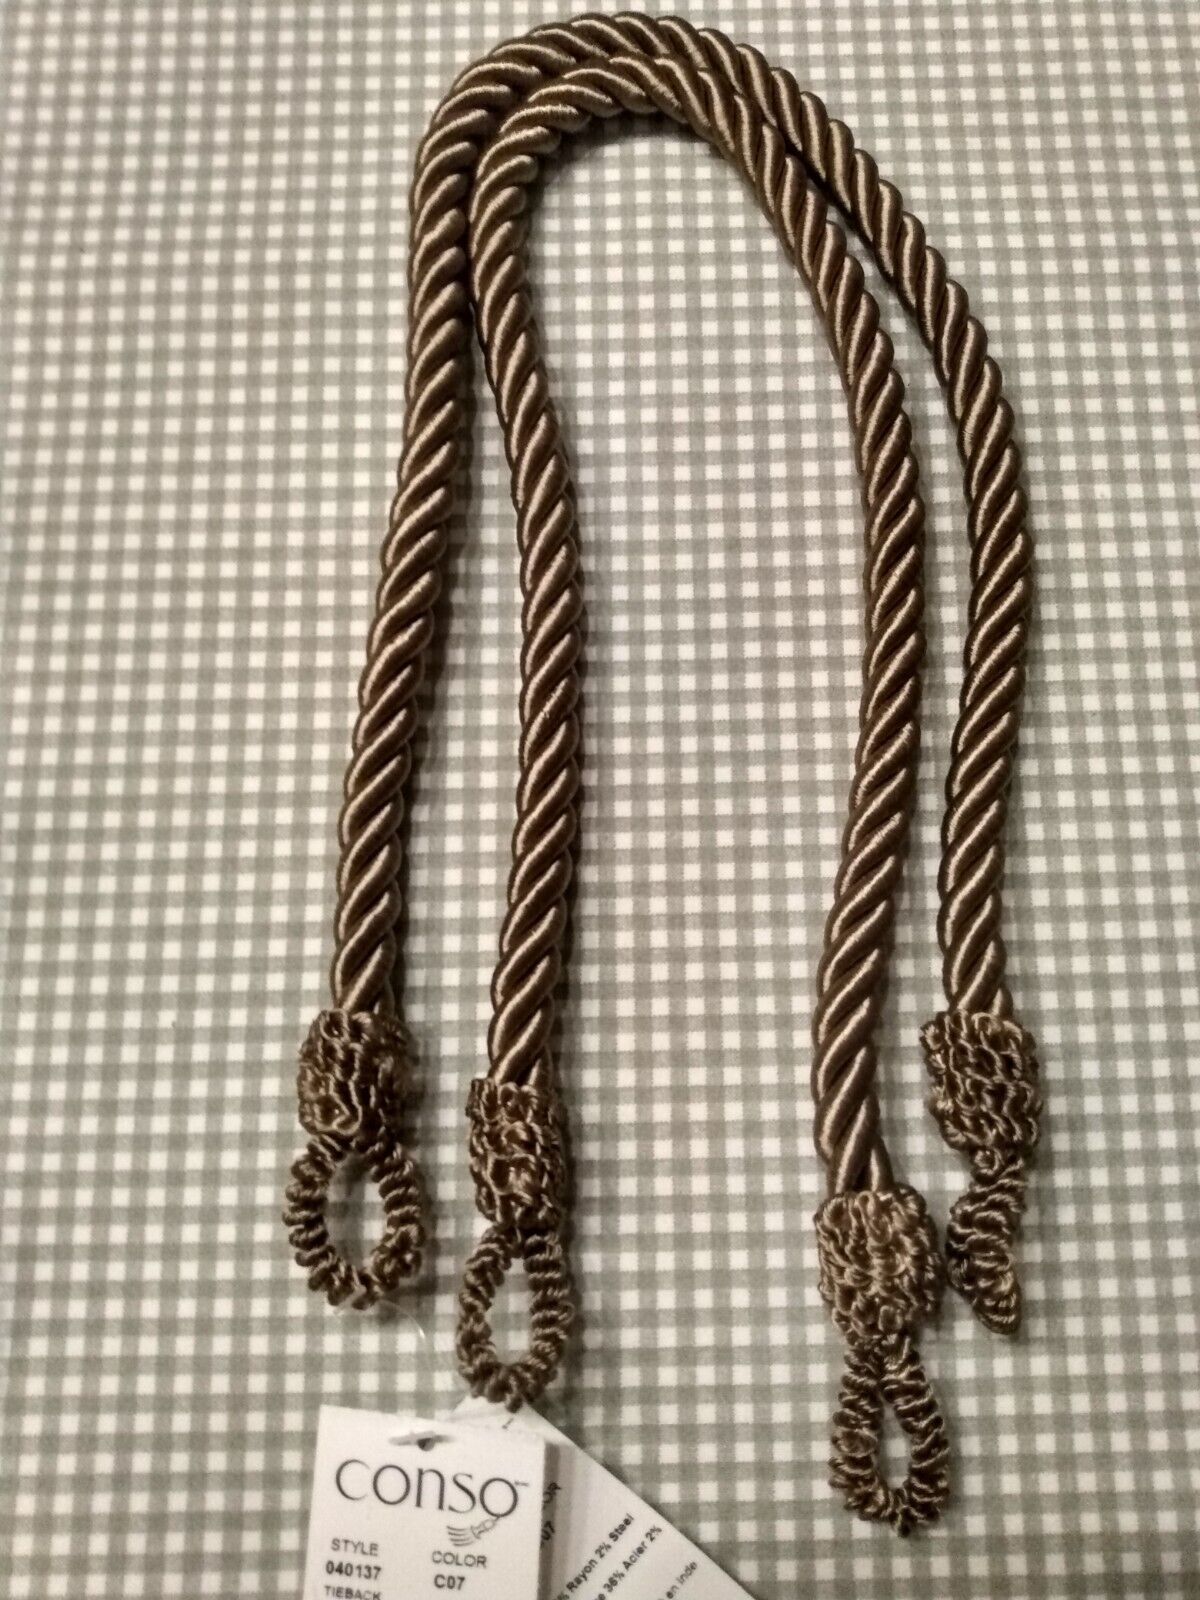 Curtain Tiebacks Drapery Conso Twisted Cord 22 Inches Lot of 2 Bronze Brown New Conso na